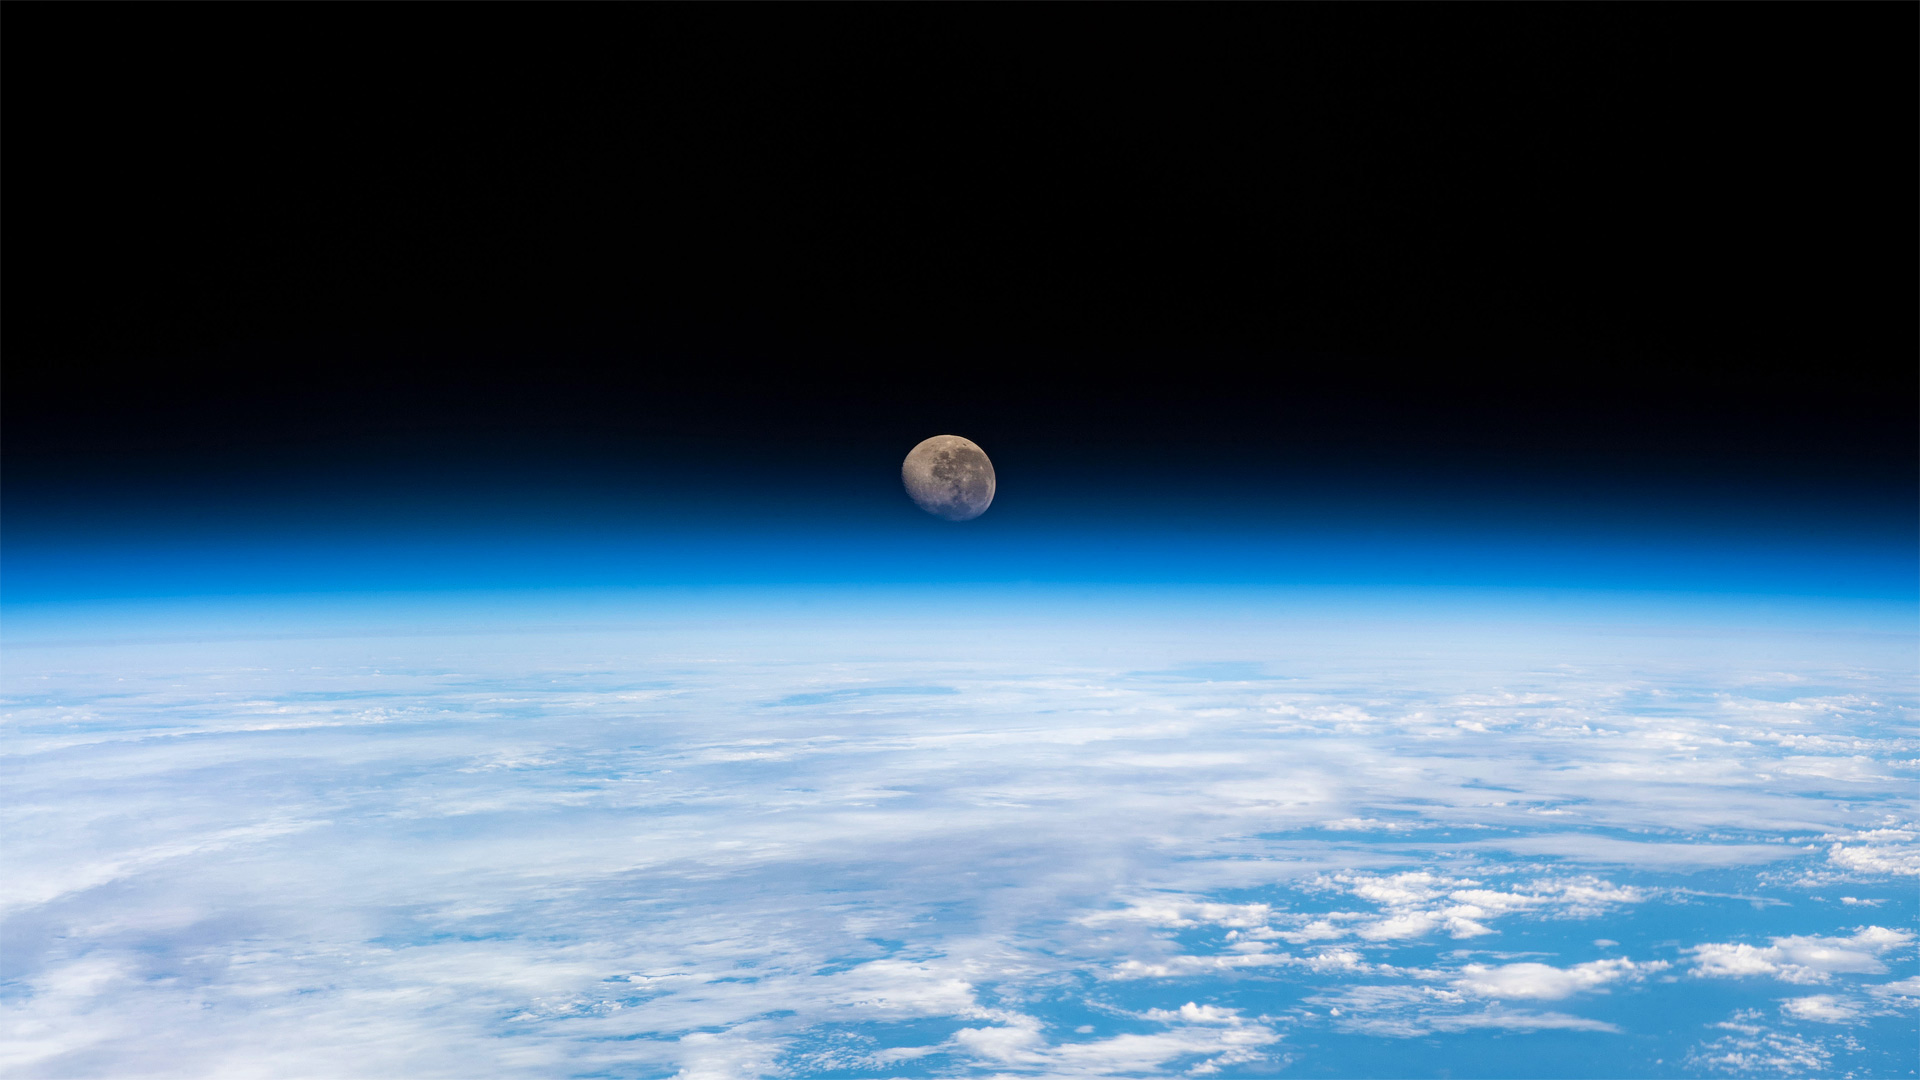 Waning gibbous moon above the Earth's horizon, photographed from the International Space Station - NASA)